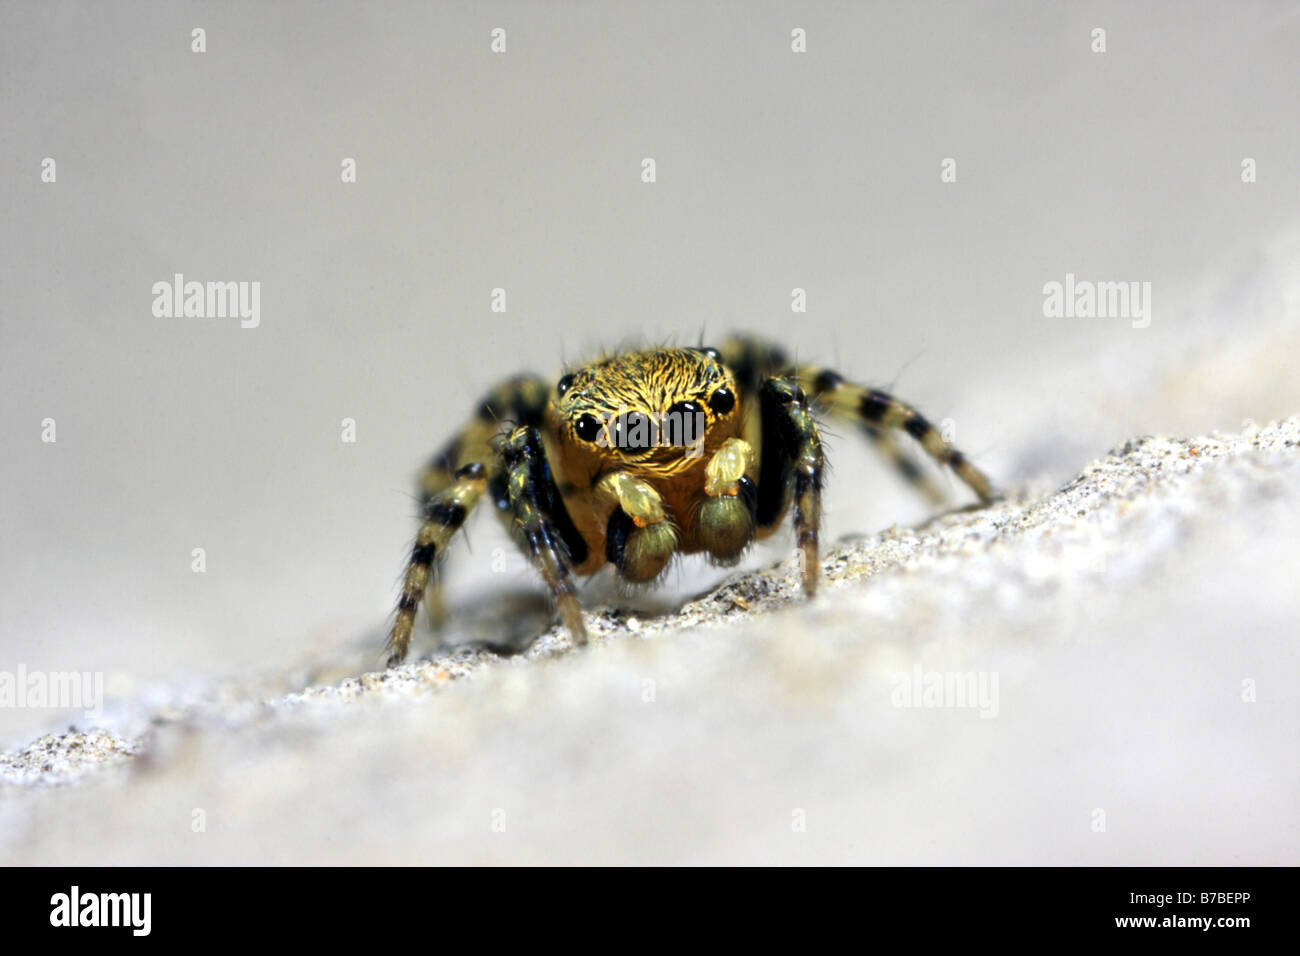 Jumping spider (Talavera aequipes, Euophrys aequipes), male sitting on a stone Stock Photo